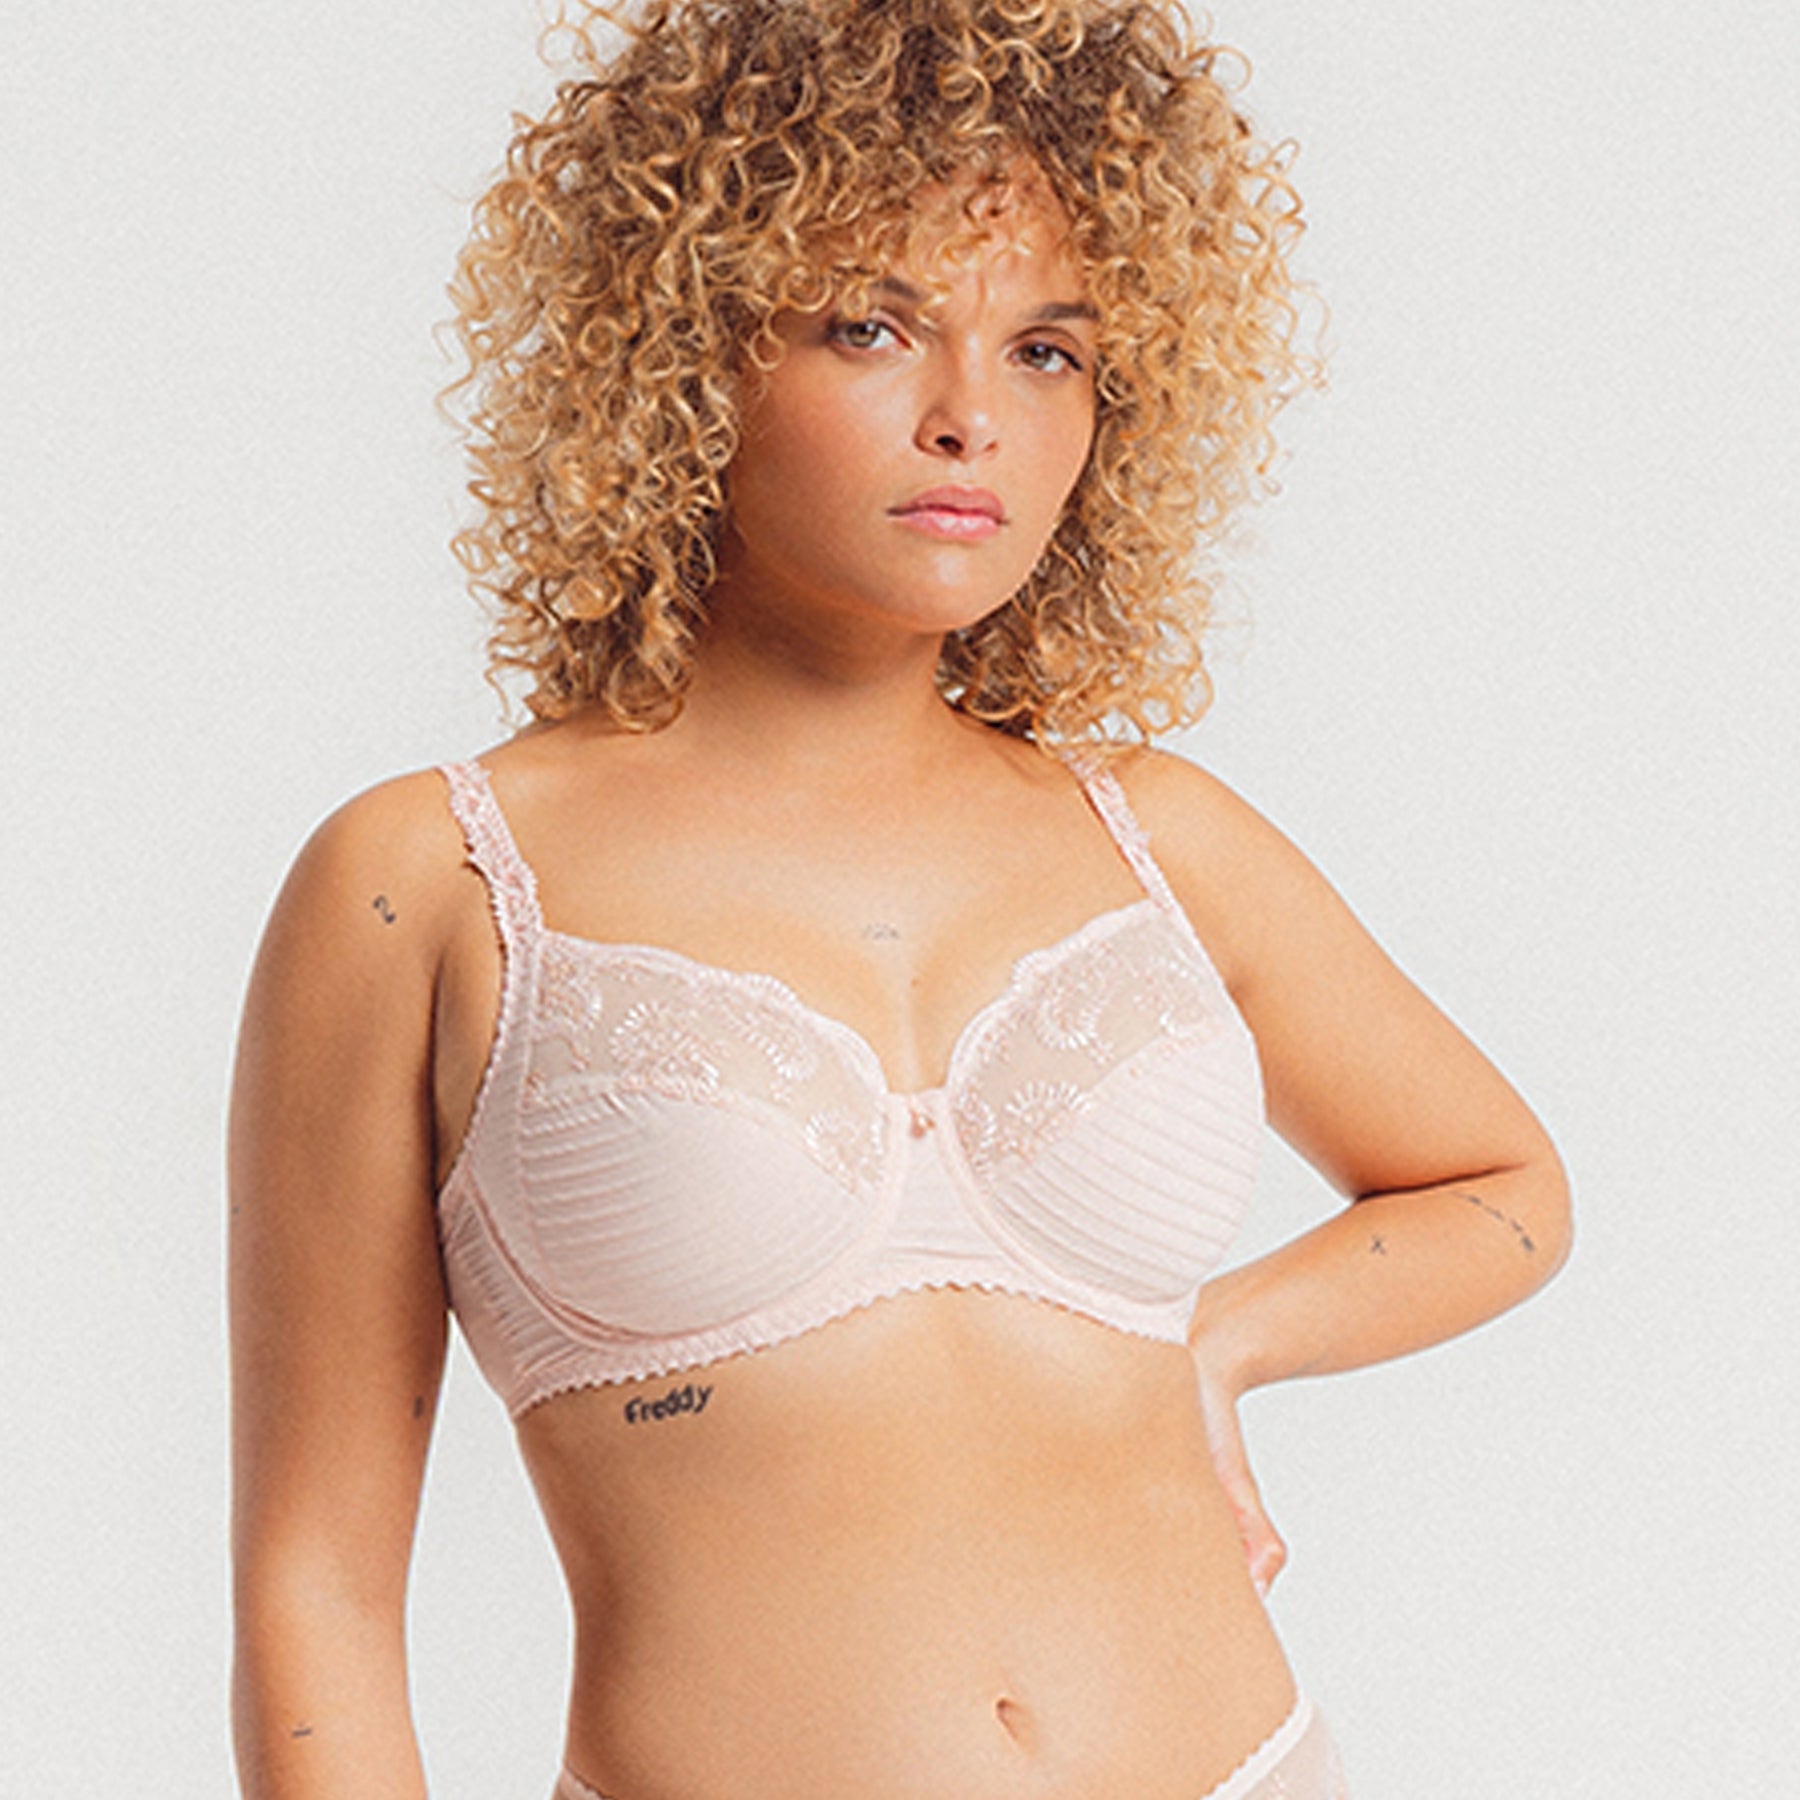 Lilli Lingerie Brunei - BRA FITTING – is your cup half full or